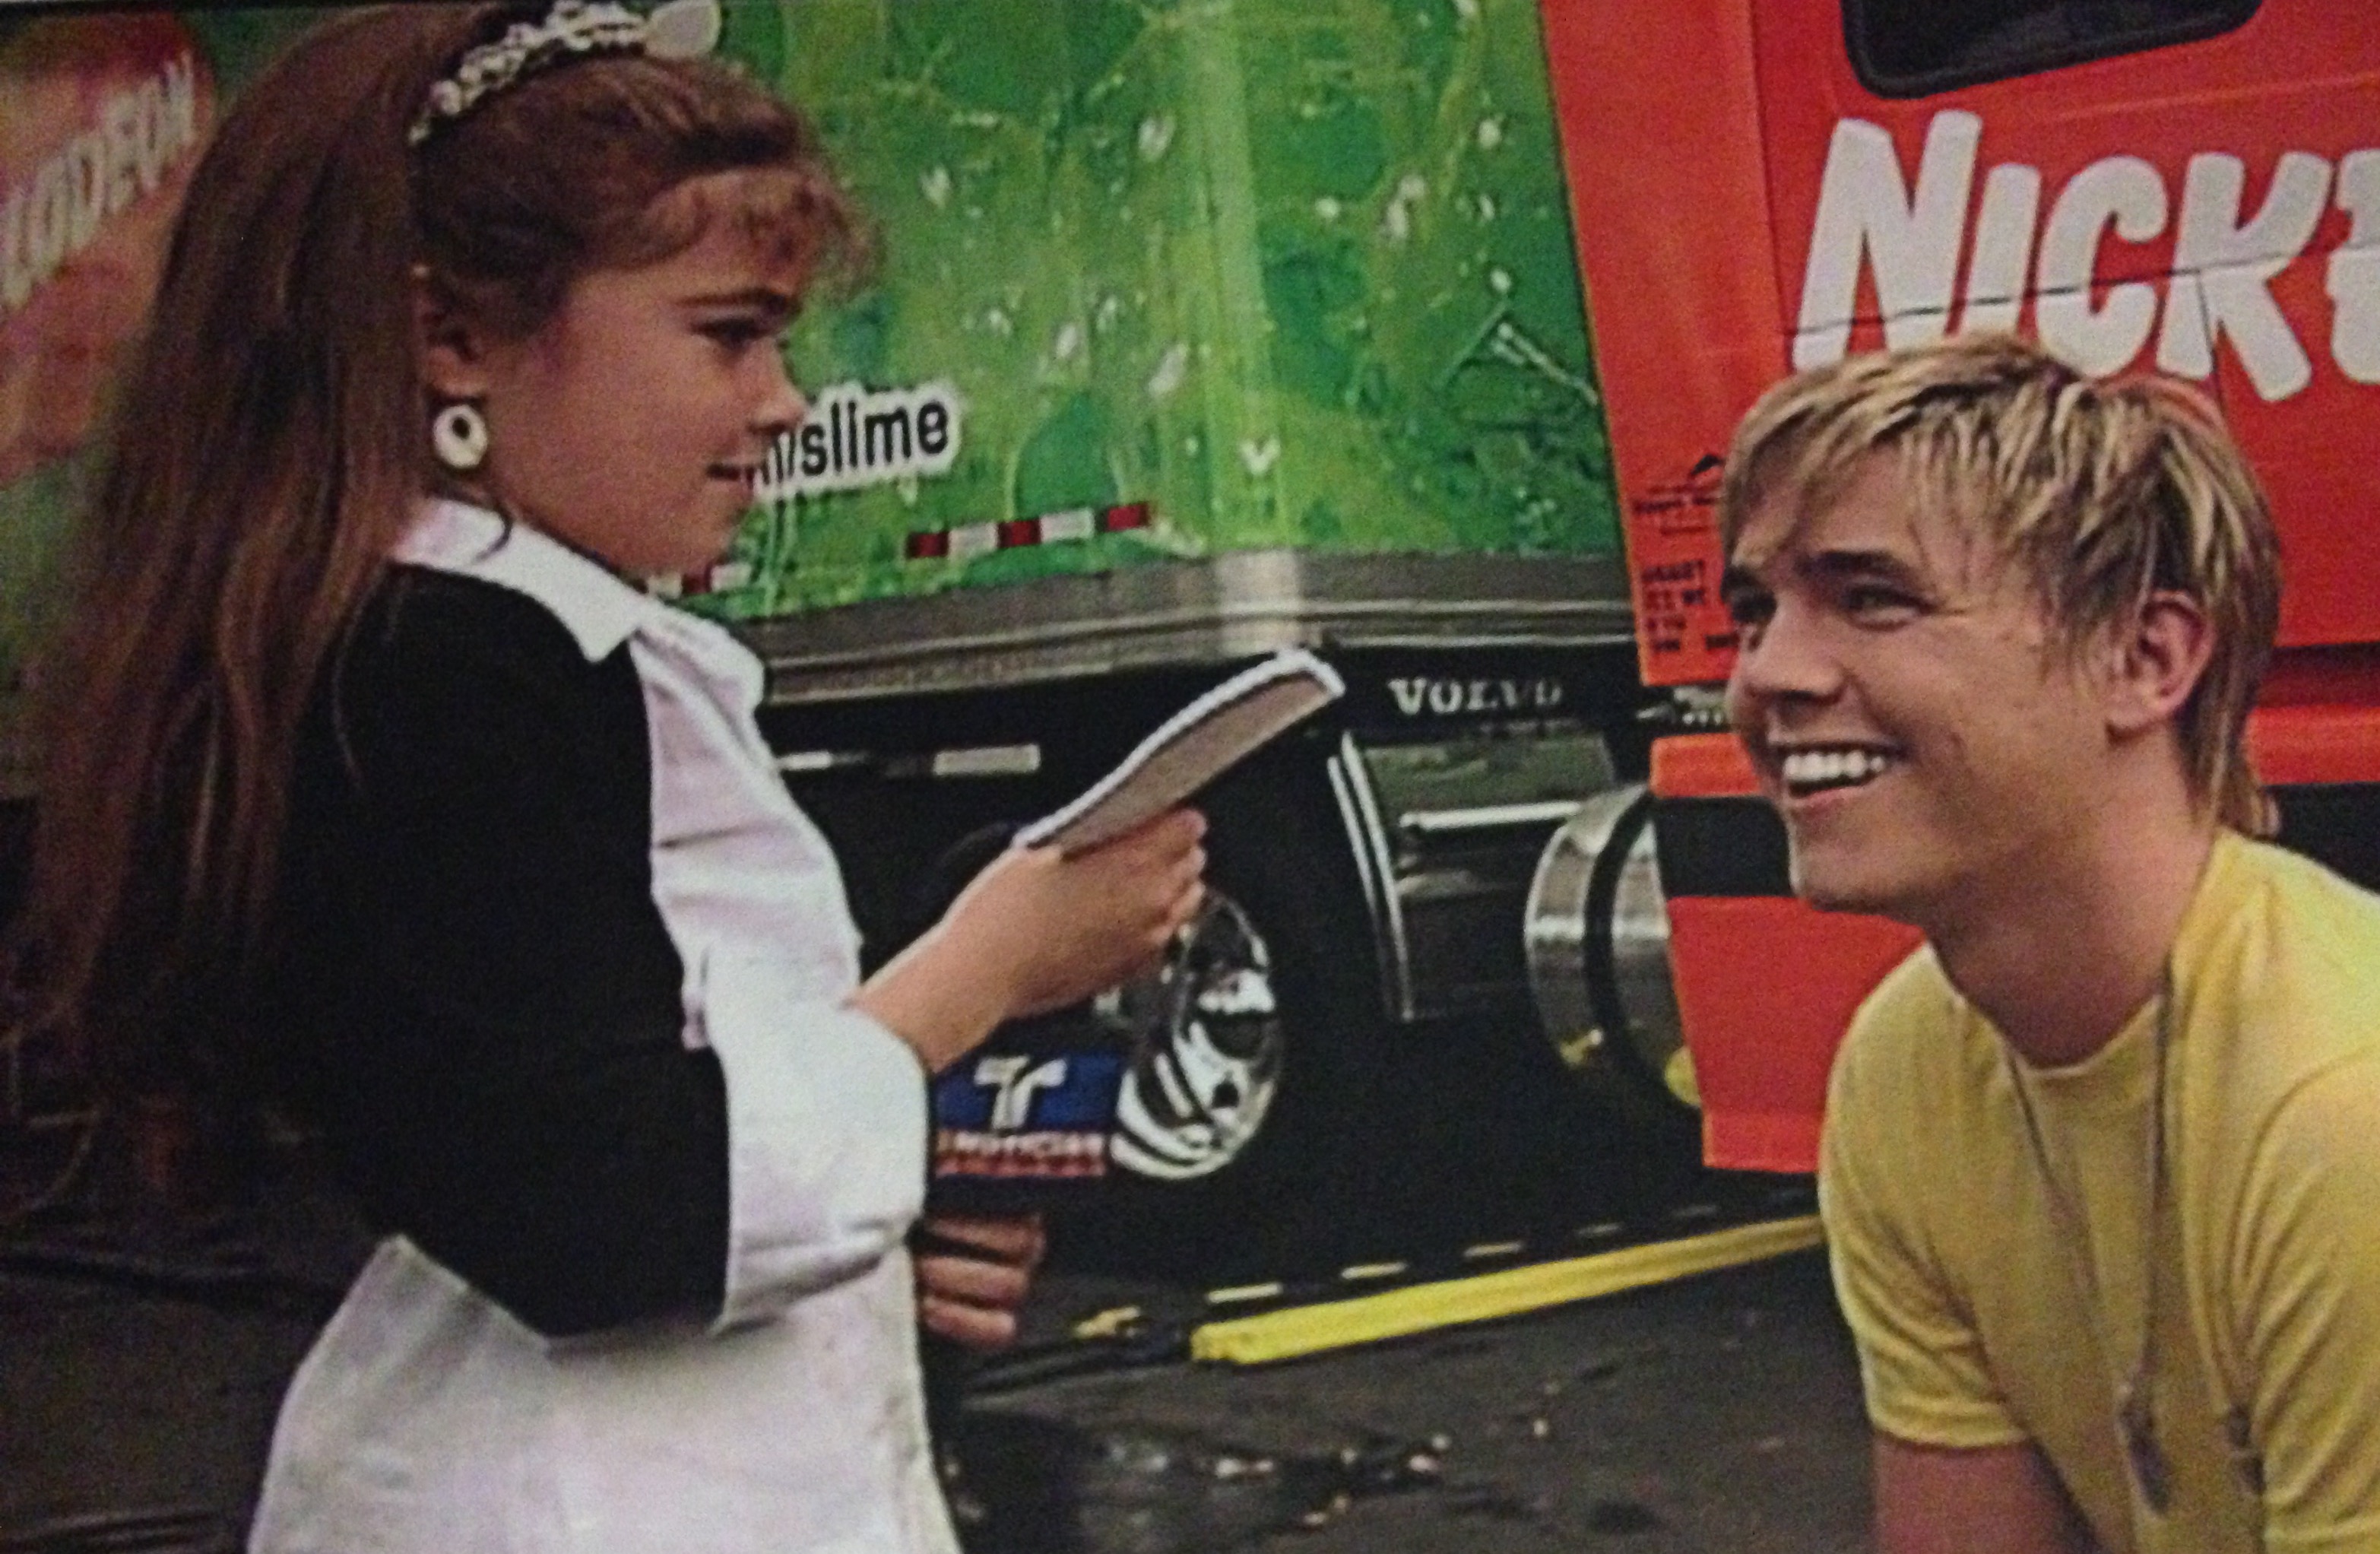 Interviewing singer Jesse McCartney at the kickoff of Nickelodeon's Slime Across America tour at the Nick Hotel on February 26th, 2007.